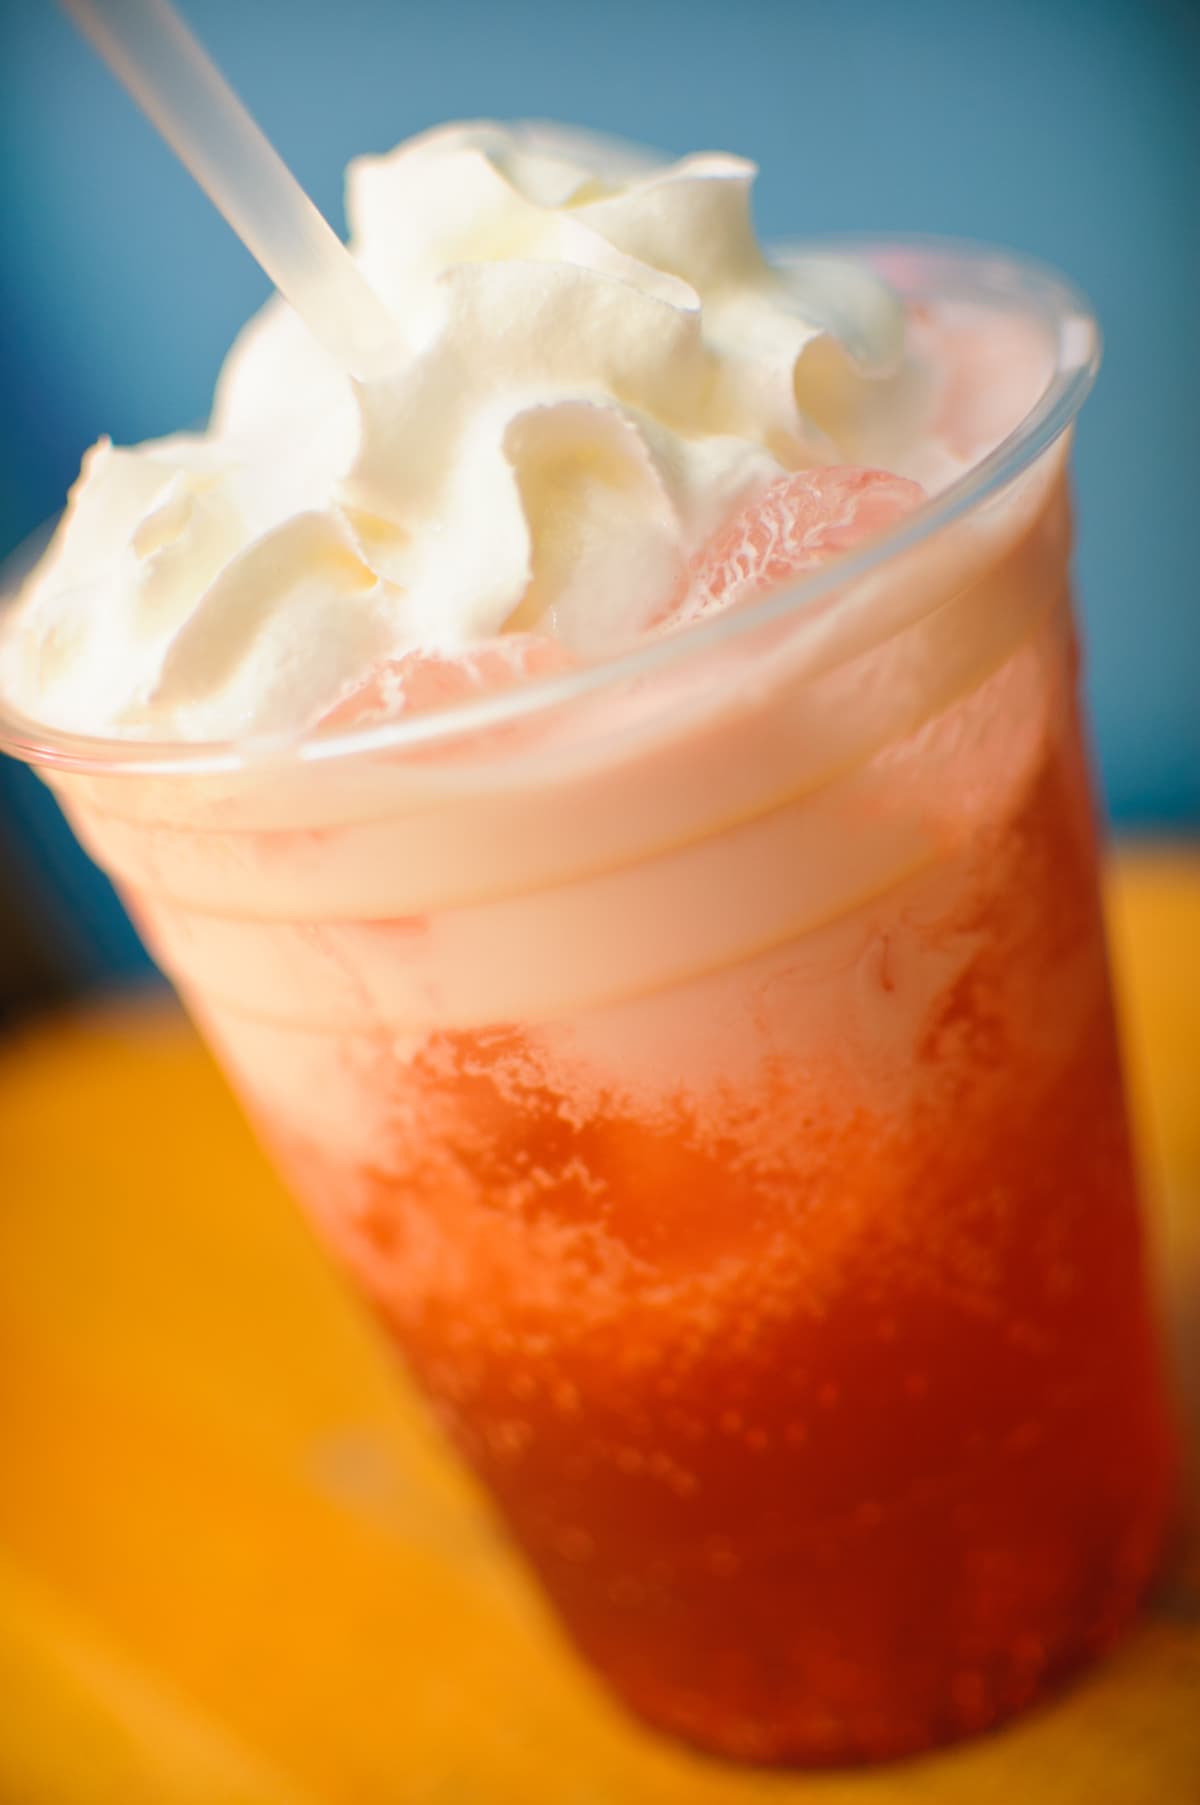 Iced Strawberry and Cherry Italian soda with whipped cream.